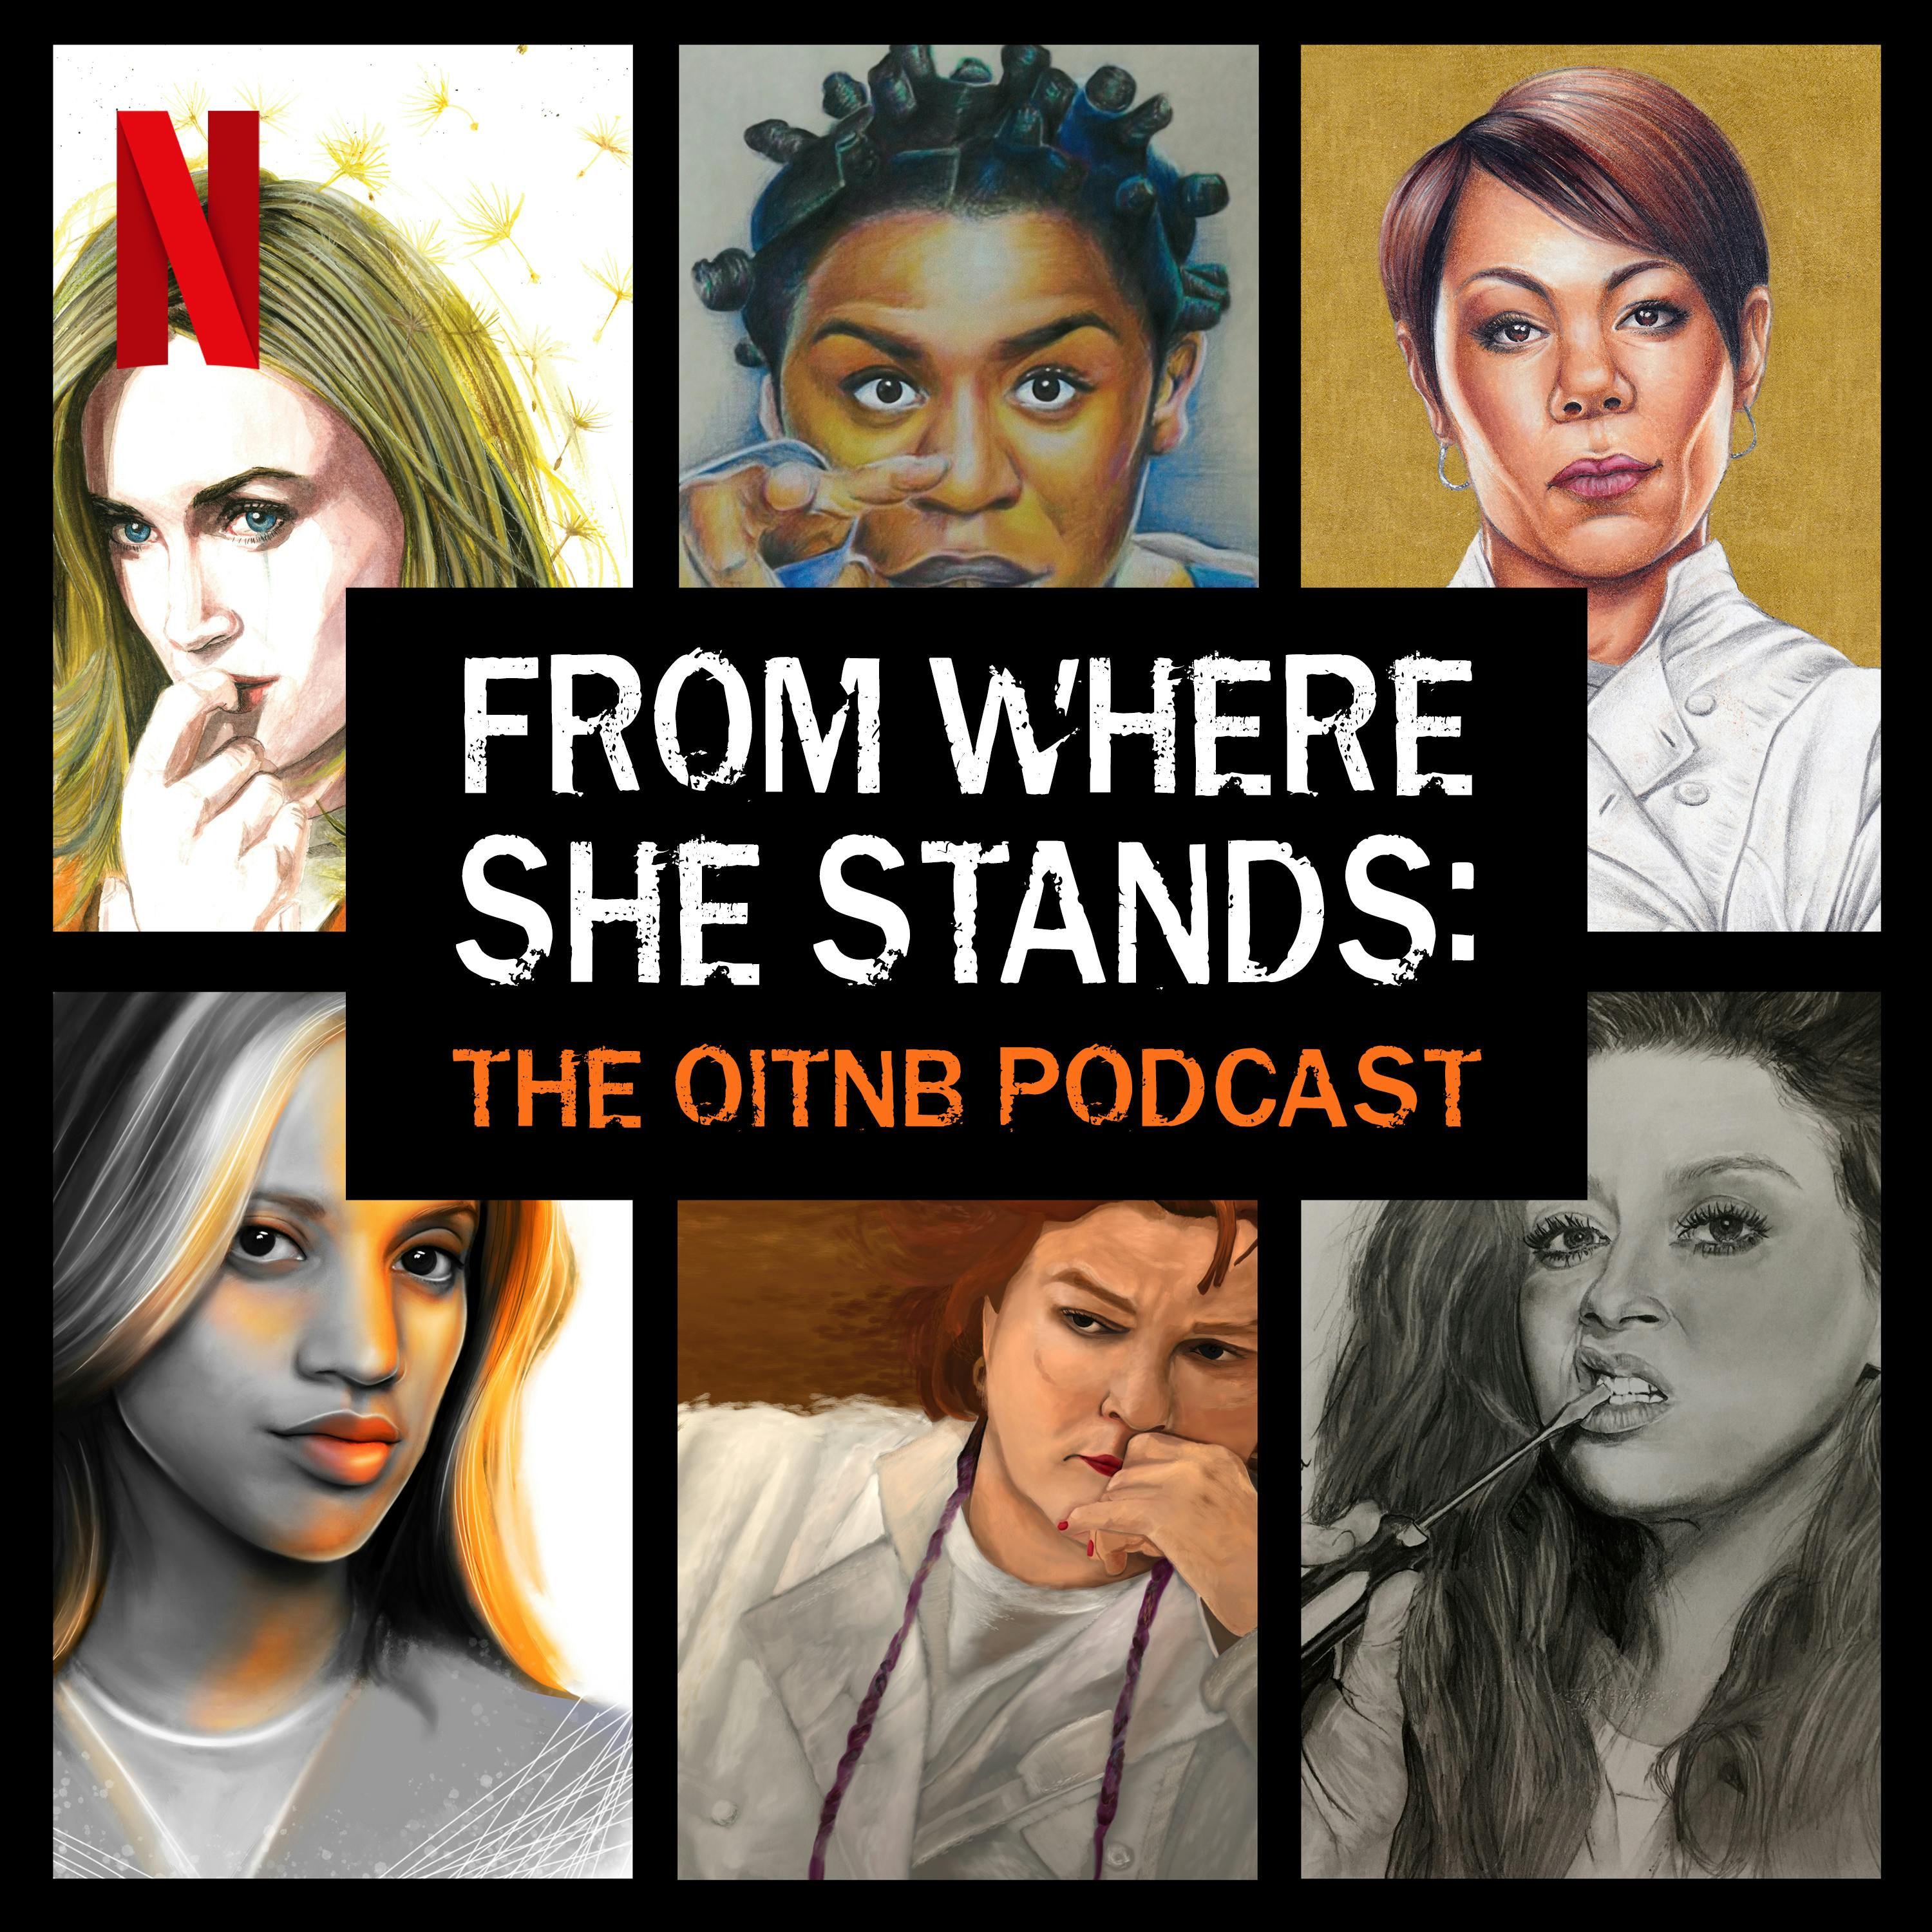 From Where She Stands: The OITNB Podcast